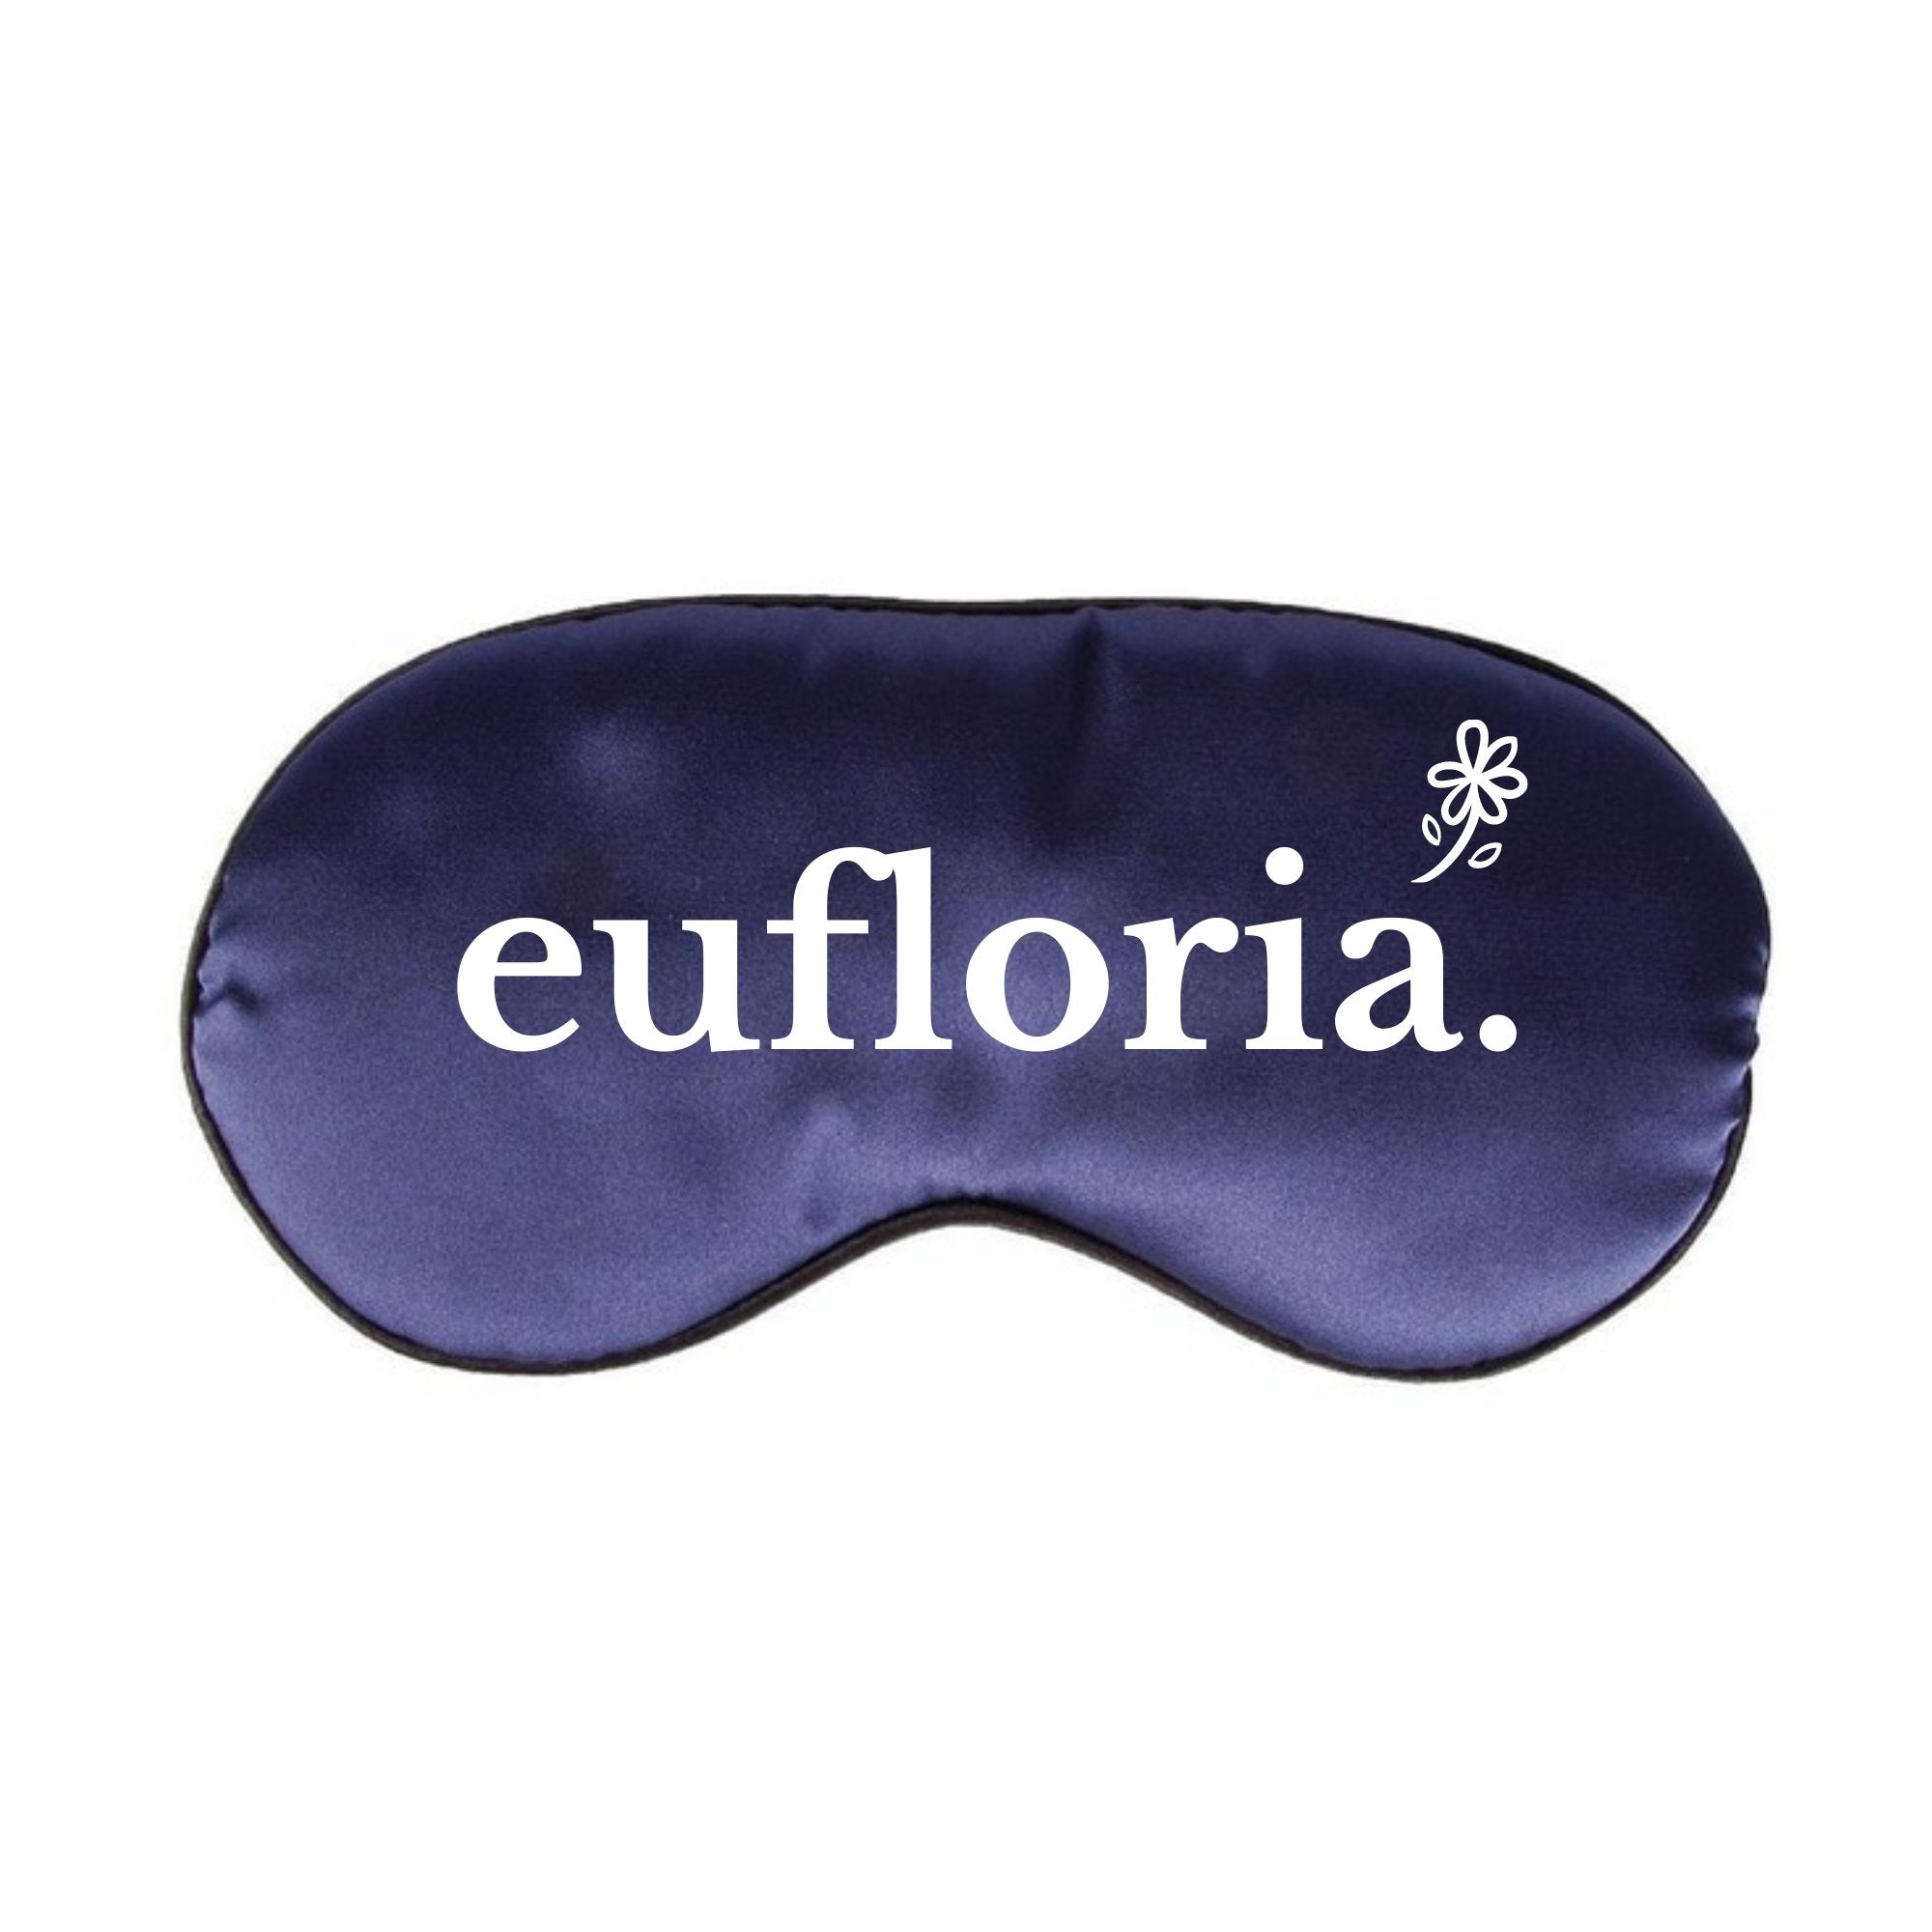 A sleep mask with a customizable area on the front